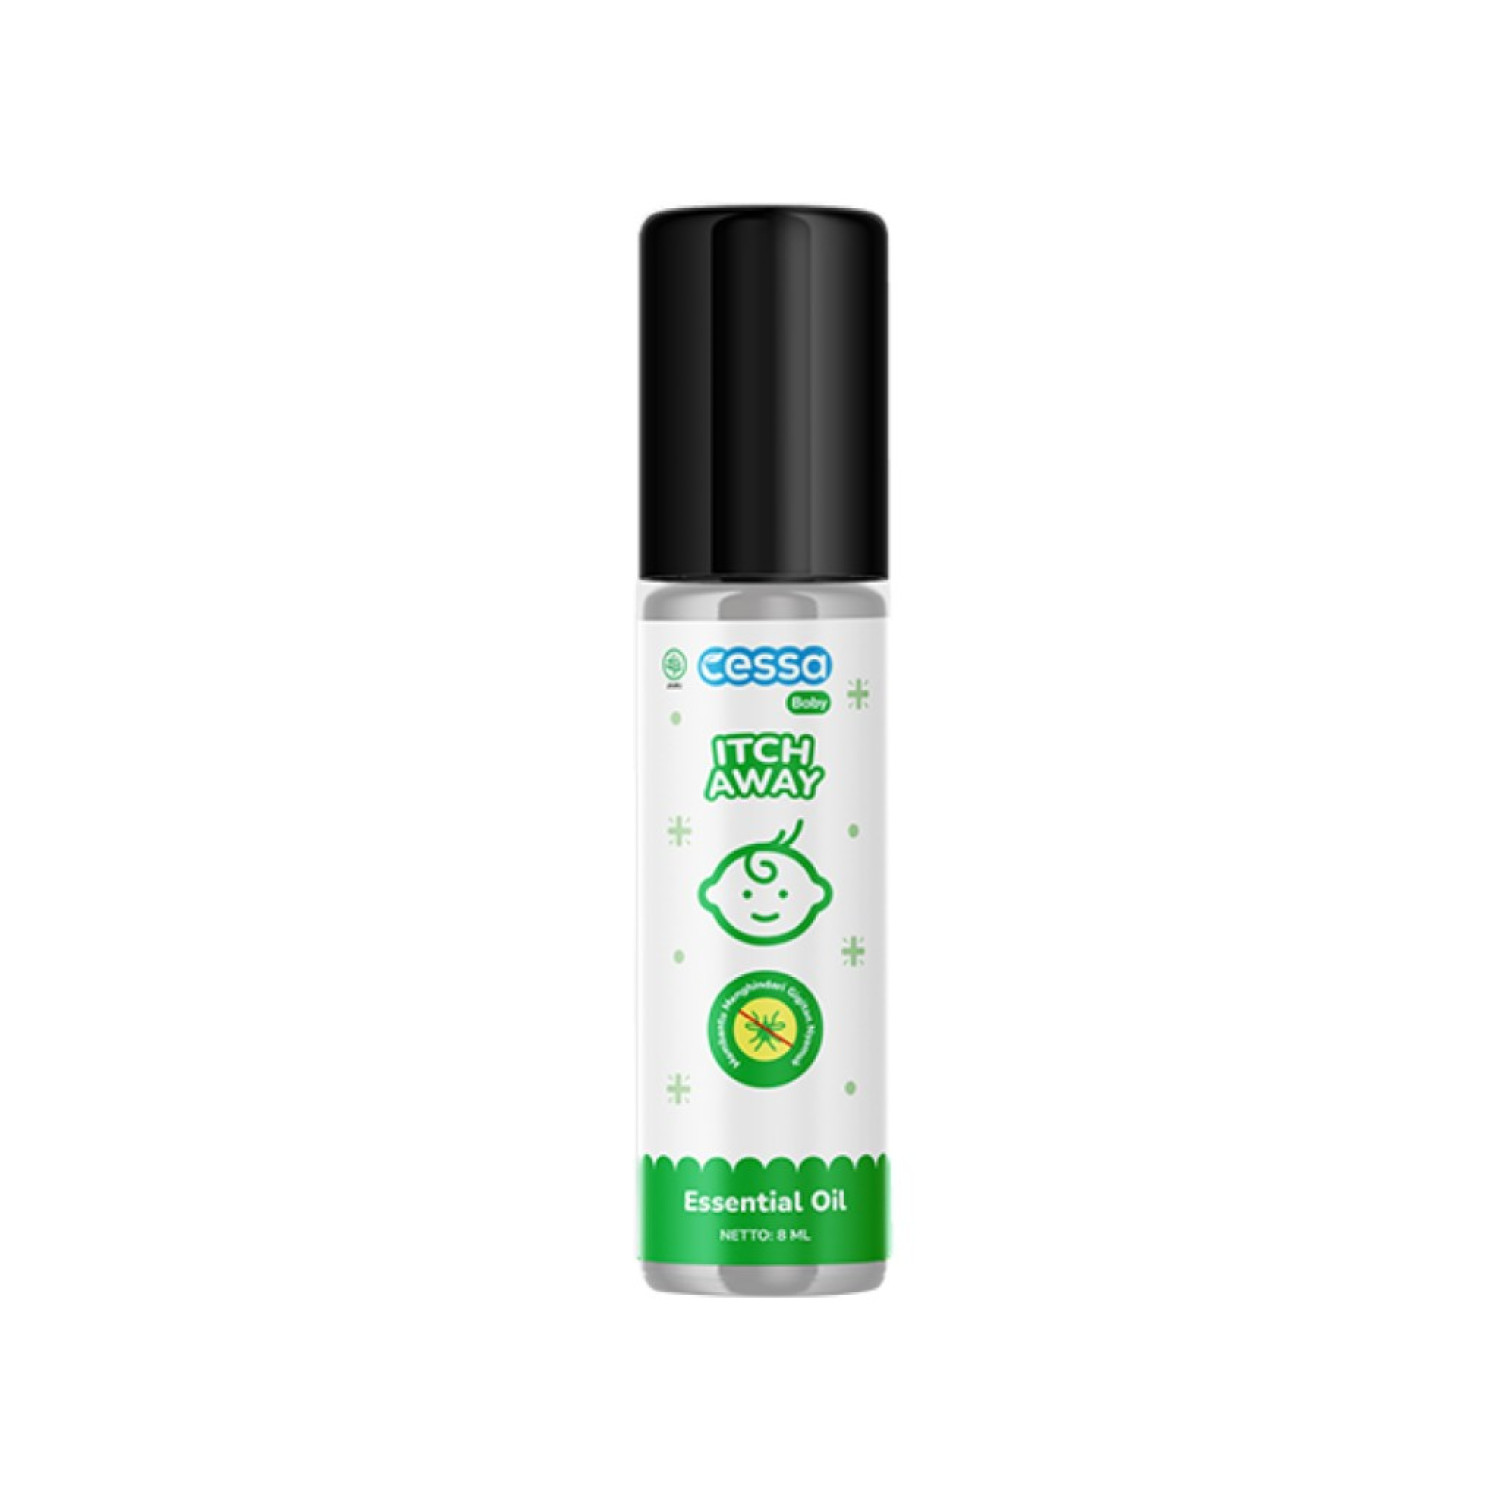 Cessa Essential Oil Baby Itch Away 